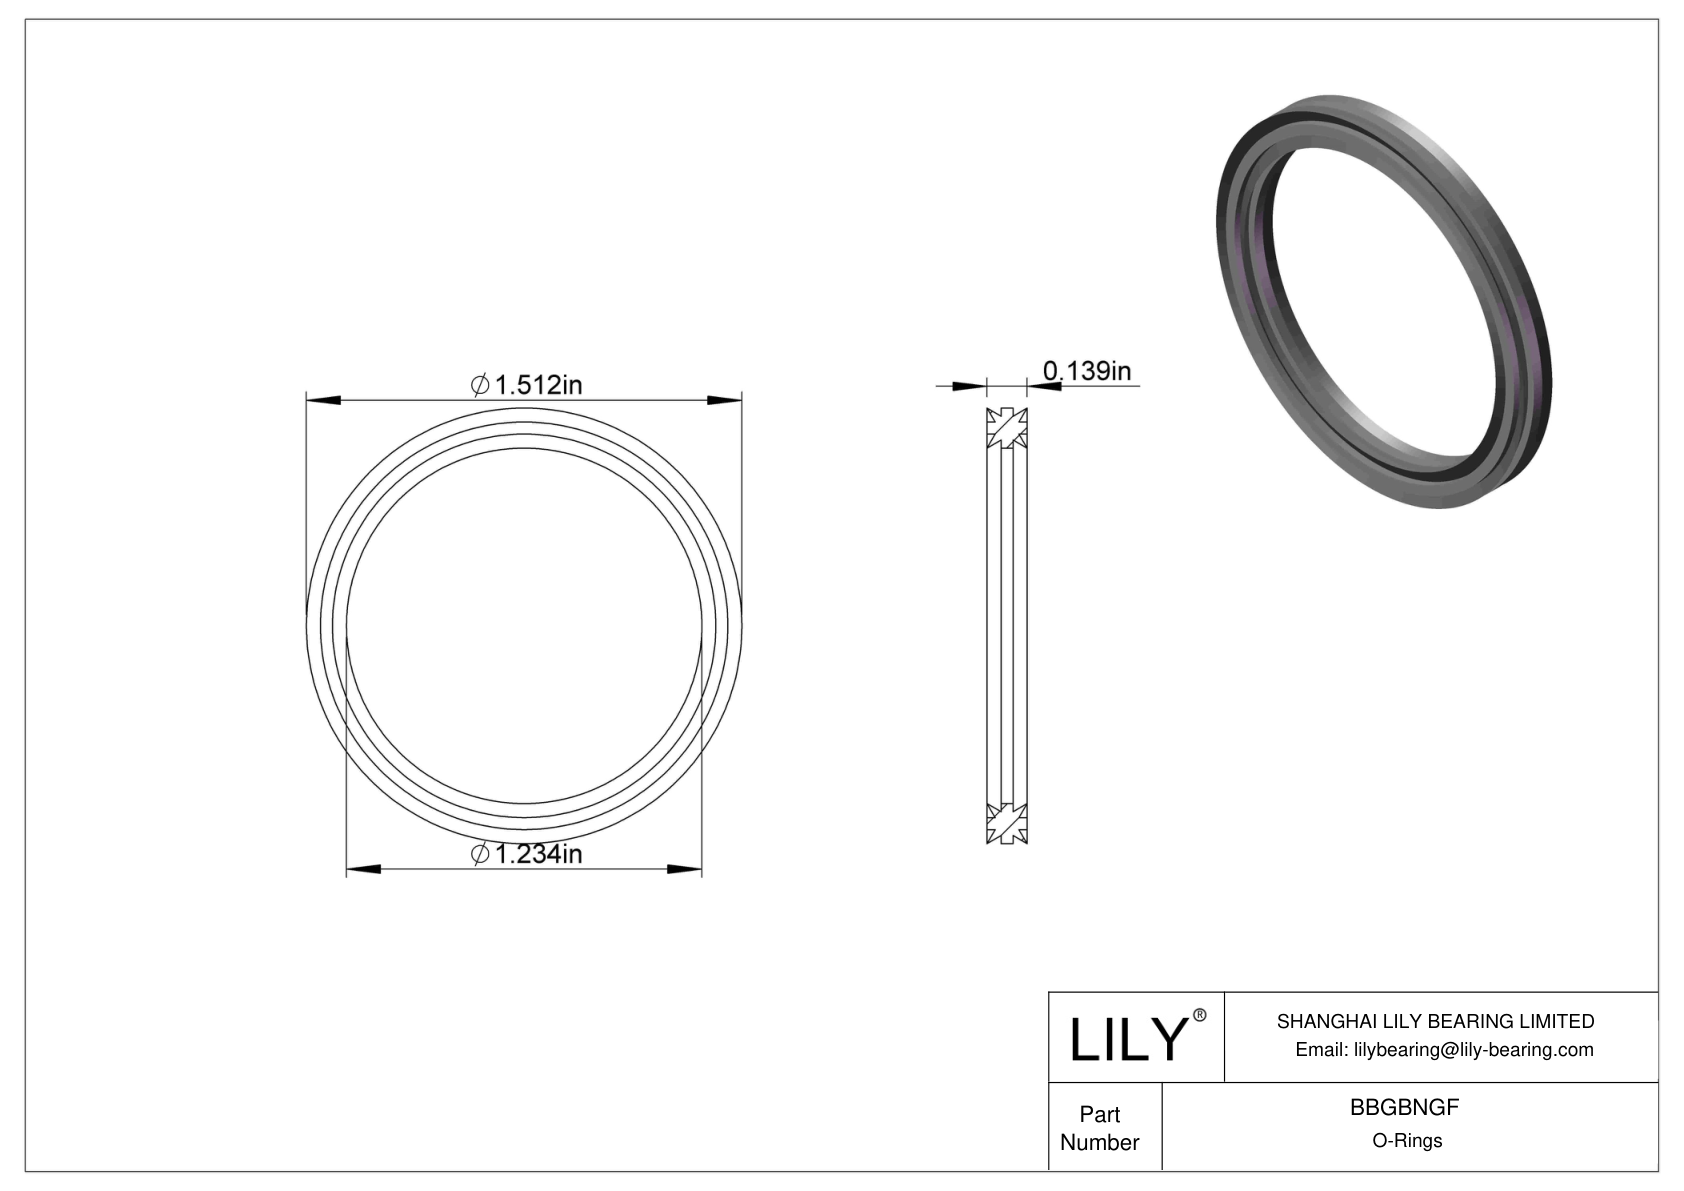 BBGBNGF Oil Resistant O-Rings Double X cad drawing